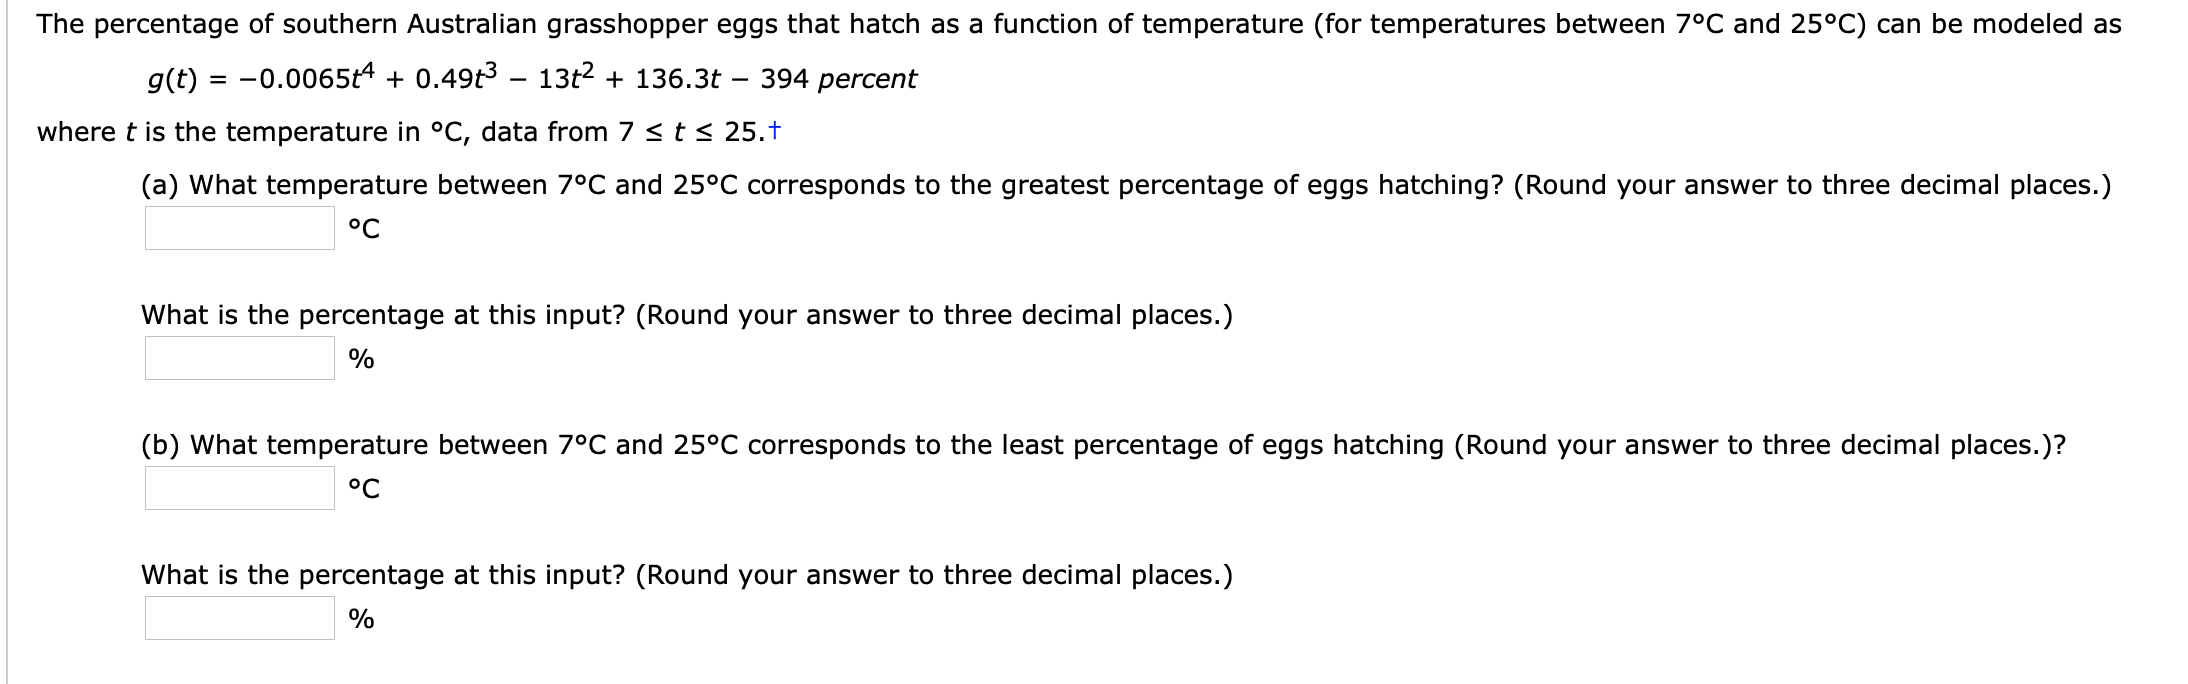 The percentage of southern Australian grasshopper eggs that hatch as a function of temperature (for temperatures between 7°C and 25°C) can be modeled as
g(t) = -0.0065t4 + 0.49t3 – 13t2 + 136.3t
394 percent
where t is the temperature in °C, data from 7 < t< 25.†
(a) What temperature between 7°C and 25°C corresponds to the greatest percentage of eggs hatching? (Round your answer to three decimal places.)
°C
What is the percentage at this input? (Round your answer to three decimal places.)
(b) What temperature between 7°C and 25°C corresponds to the least percentage of eggs hatching (Round your answer to three decimal places.)?
°C
What is the percentage at this input? (Round your answer to three decimal places.)
